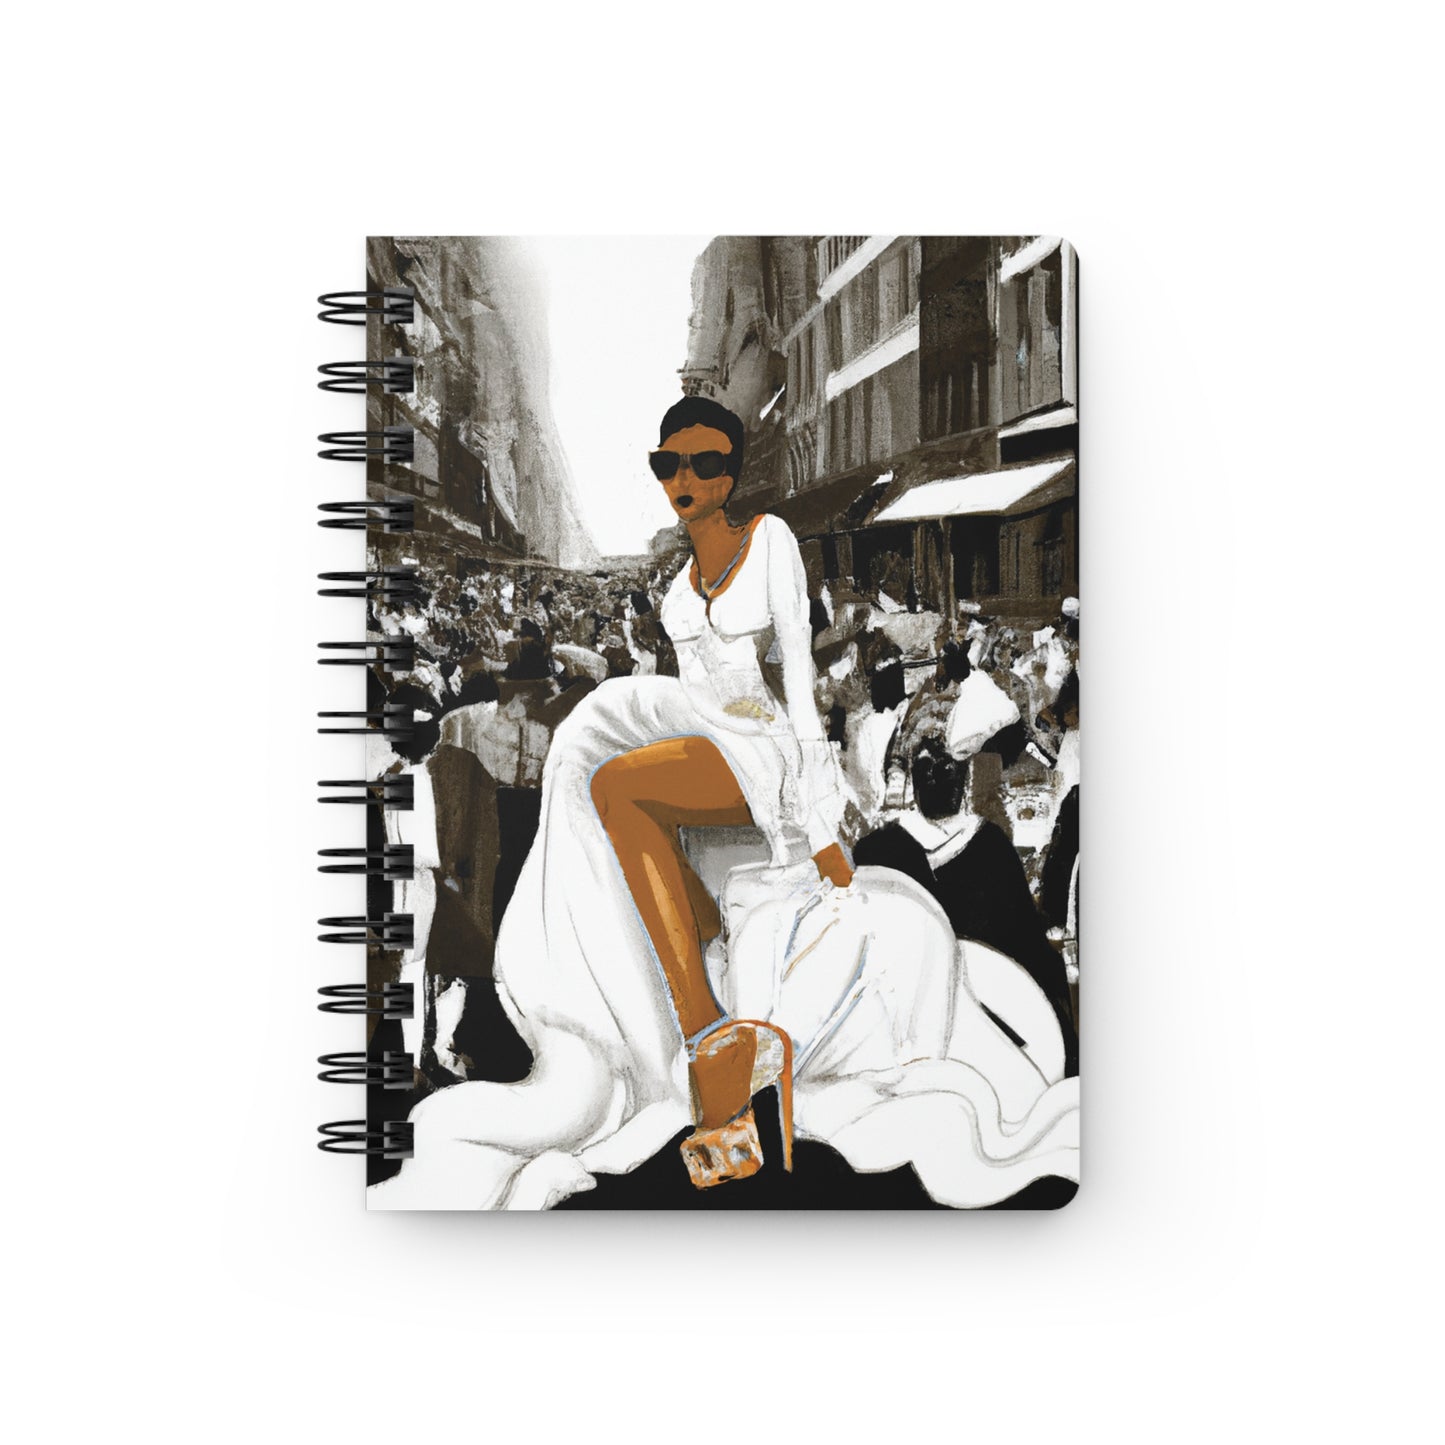 Flossy Black & White Spiral Bound Notebooks and Journals with 2023-2024 Year-at-a-Glance Calendar